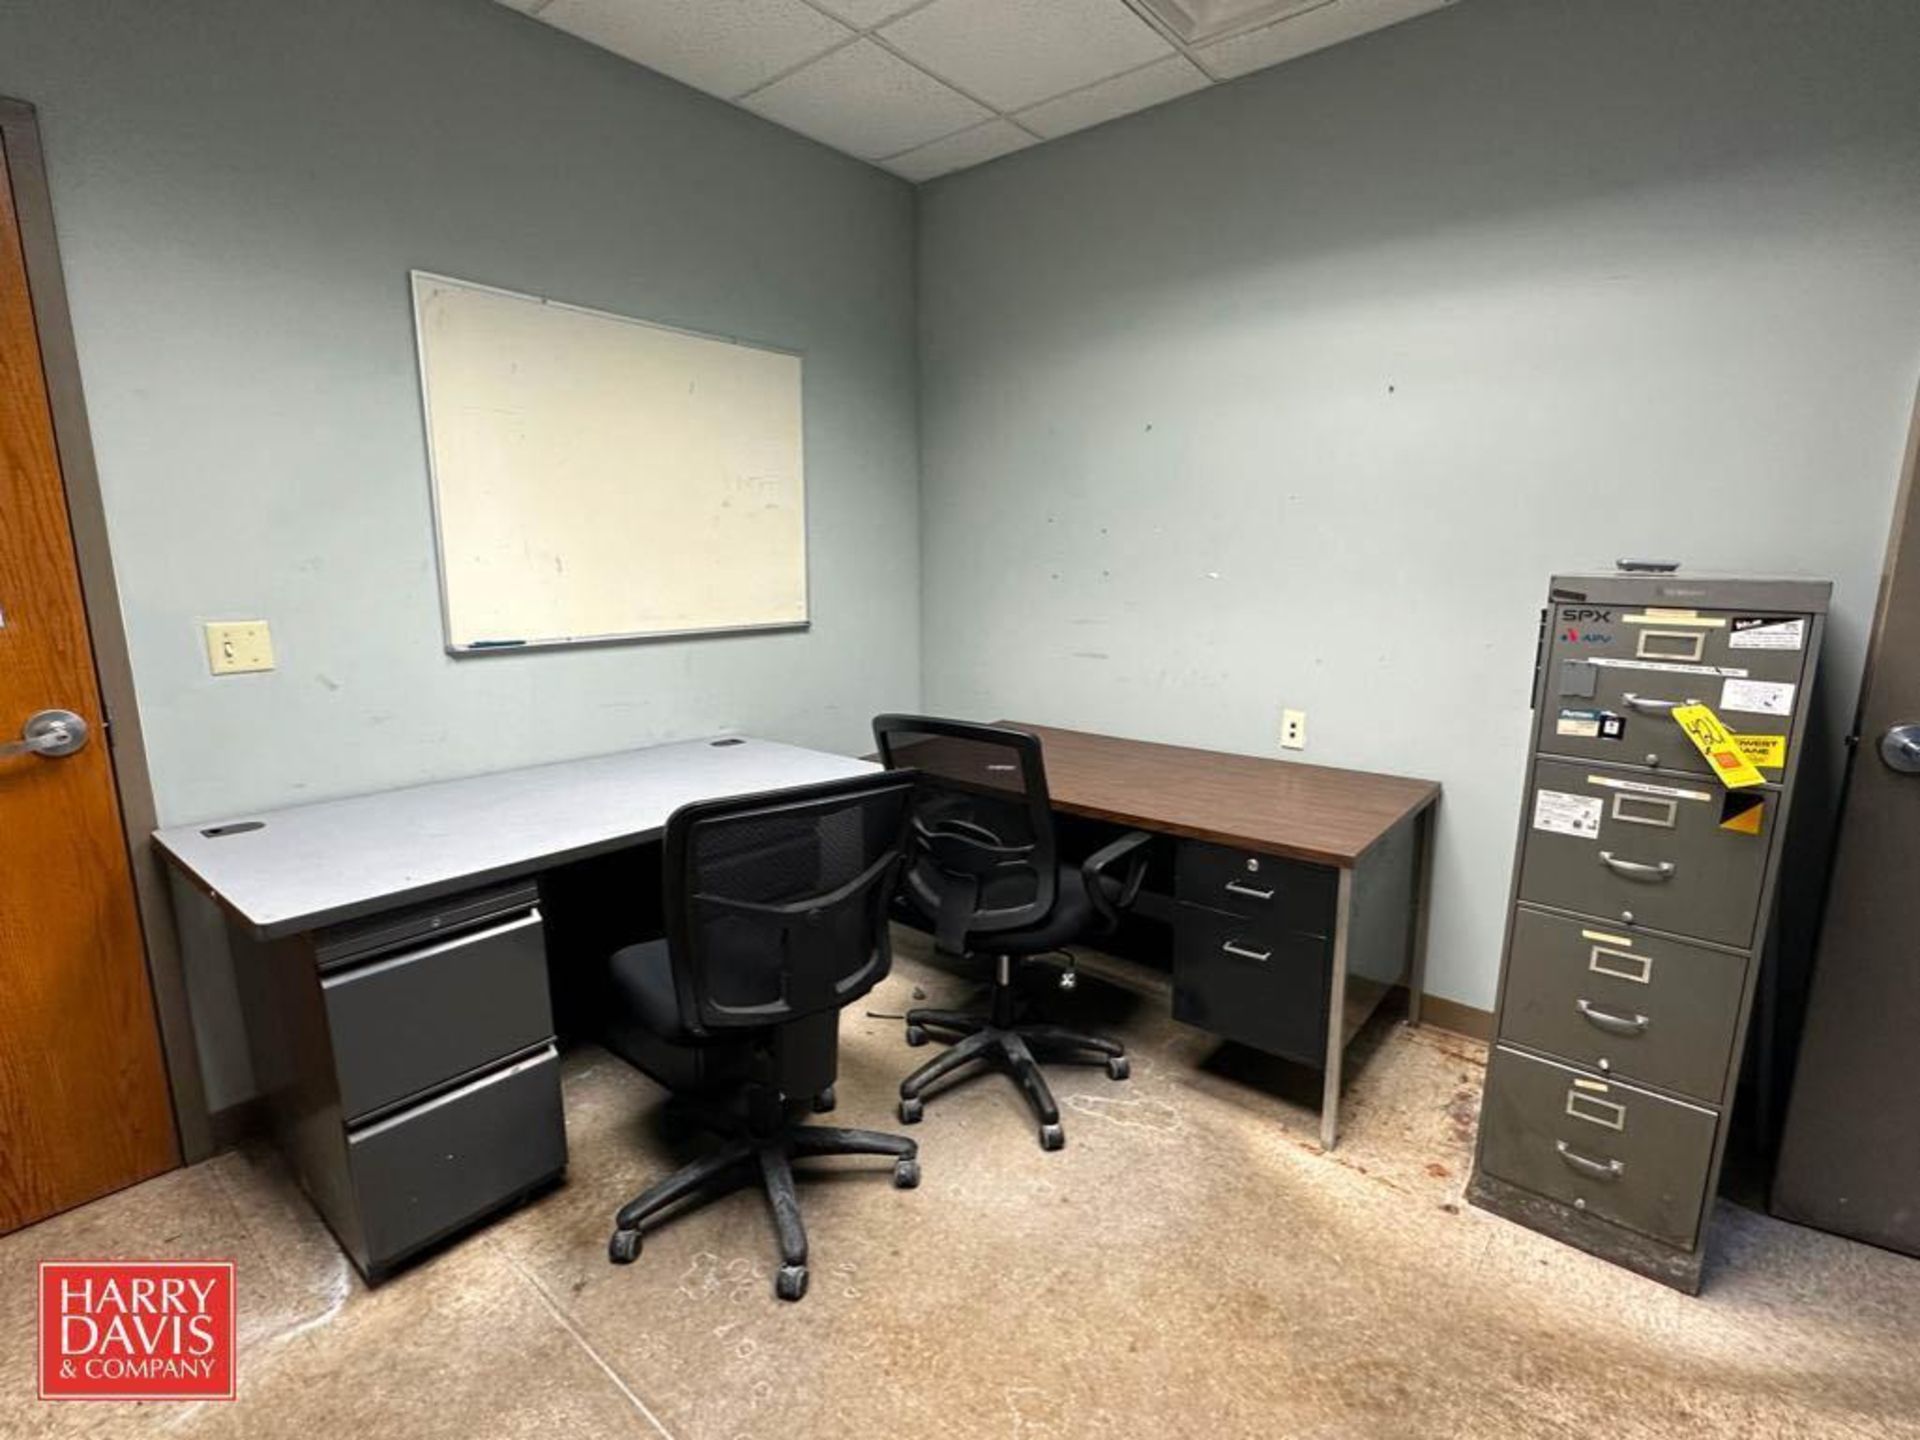 Desks, Chairs and File Cabinet - Rigging Fee: $50